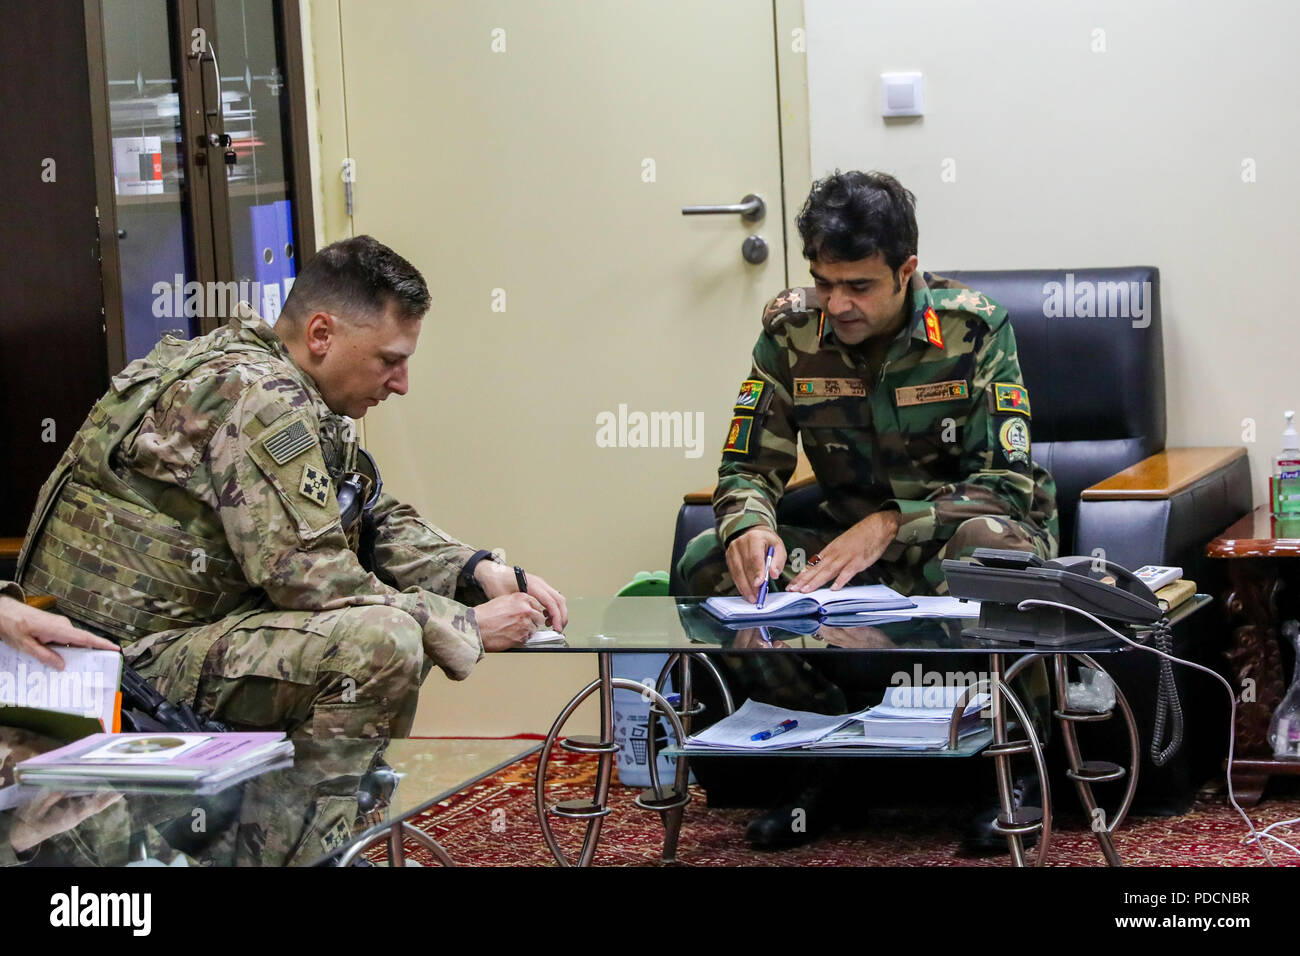 KANDAHAR PROVINCE, Afghanistan (August 5, 2018) -- U.S. Army 1st Lt. Steven Bettger, left, Train, Advise and Assist Command-South medical advisor, and Afghan Lt. Col Momand K., Kandahar Regional Military Hospital acting commander, exchange notes, August 5, 2018, during a medical advisory visit at Camp Hero in Kandahar, Afghanistan. Bettger and staff members from the Kandahar Airfield NATO Role III Multinational Medical Unit conduct routine visits to KRMH to train and advice Afghan medical staff. (U.S. Army photo by Staff Sgt. Neysa Canfield/TAAC-South Public Affairs) Stock Photo